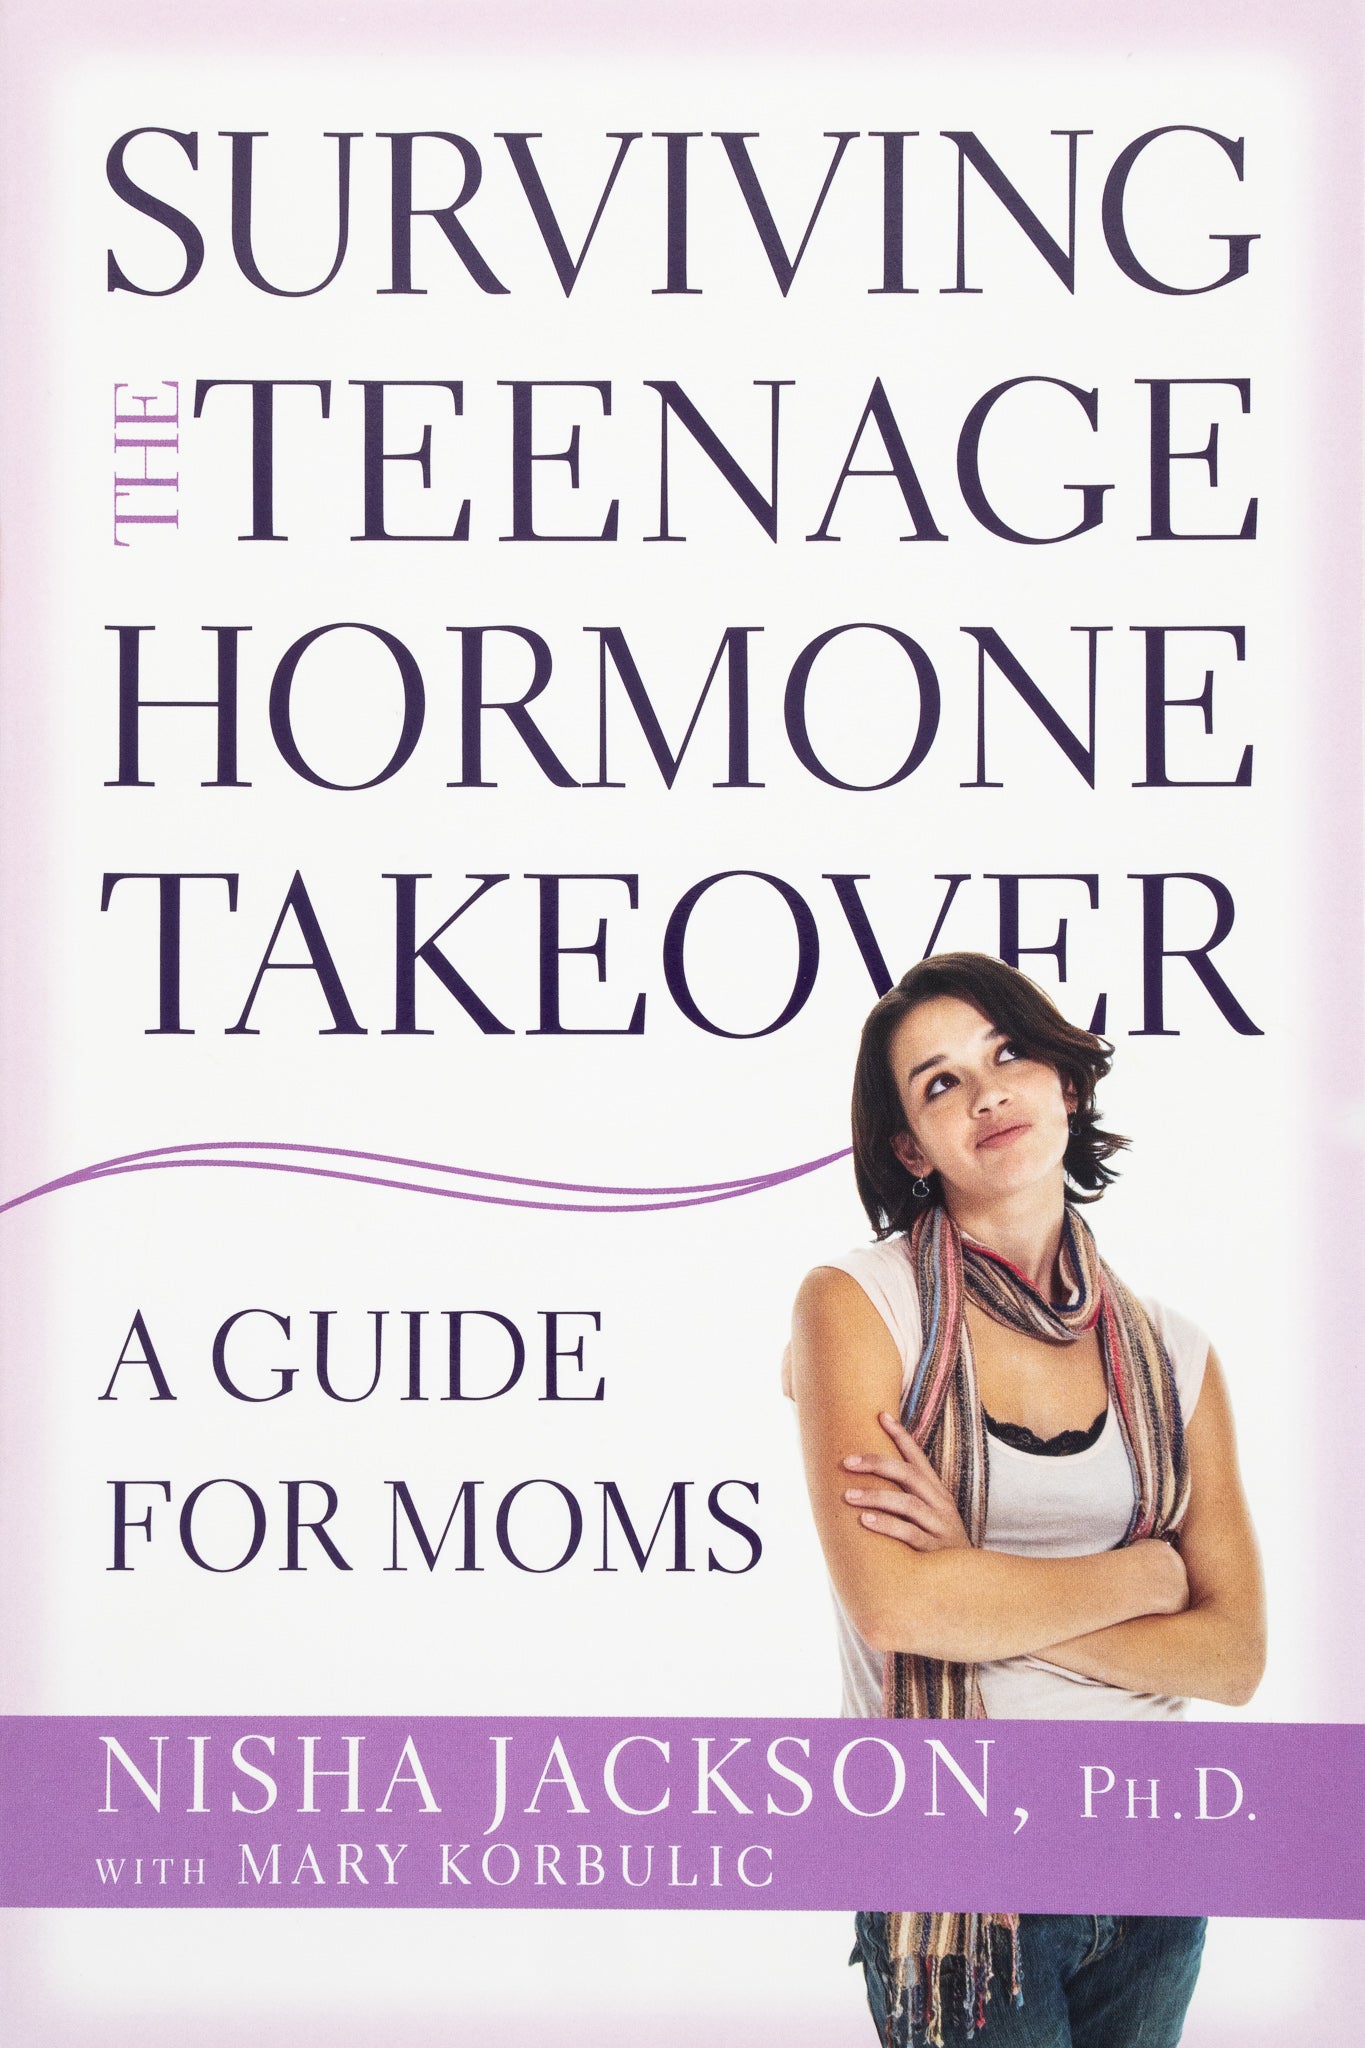 Surviving the teenage hormone takeover book cover